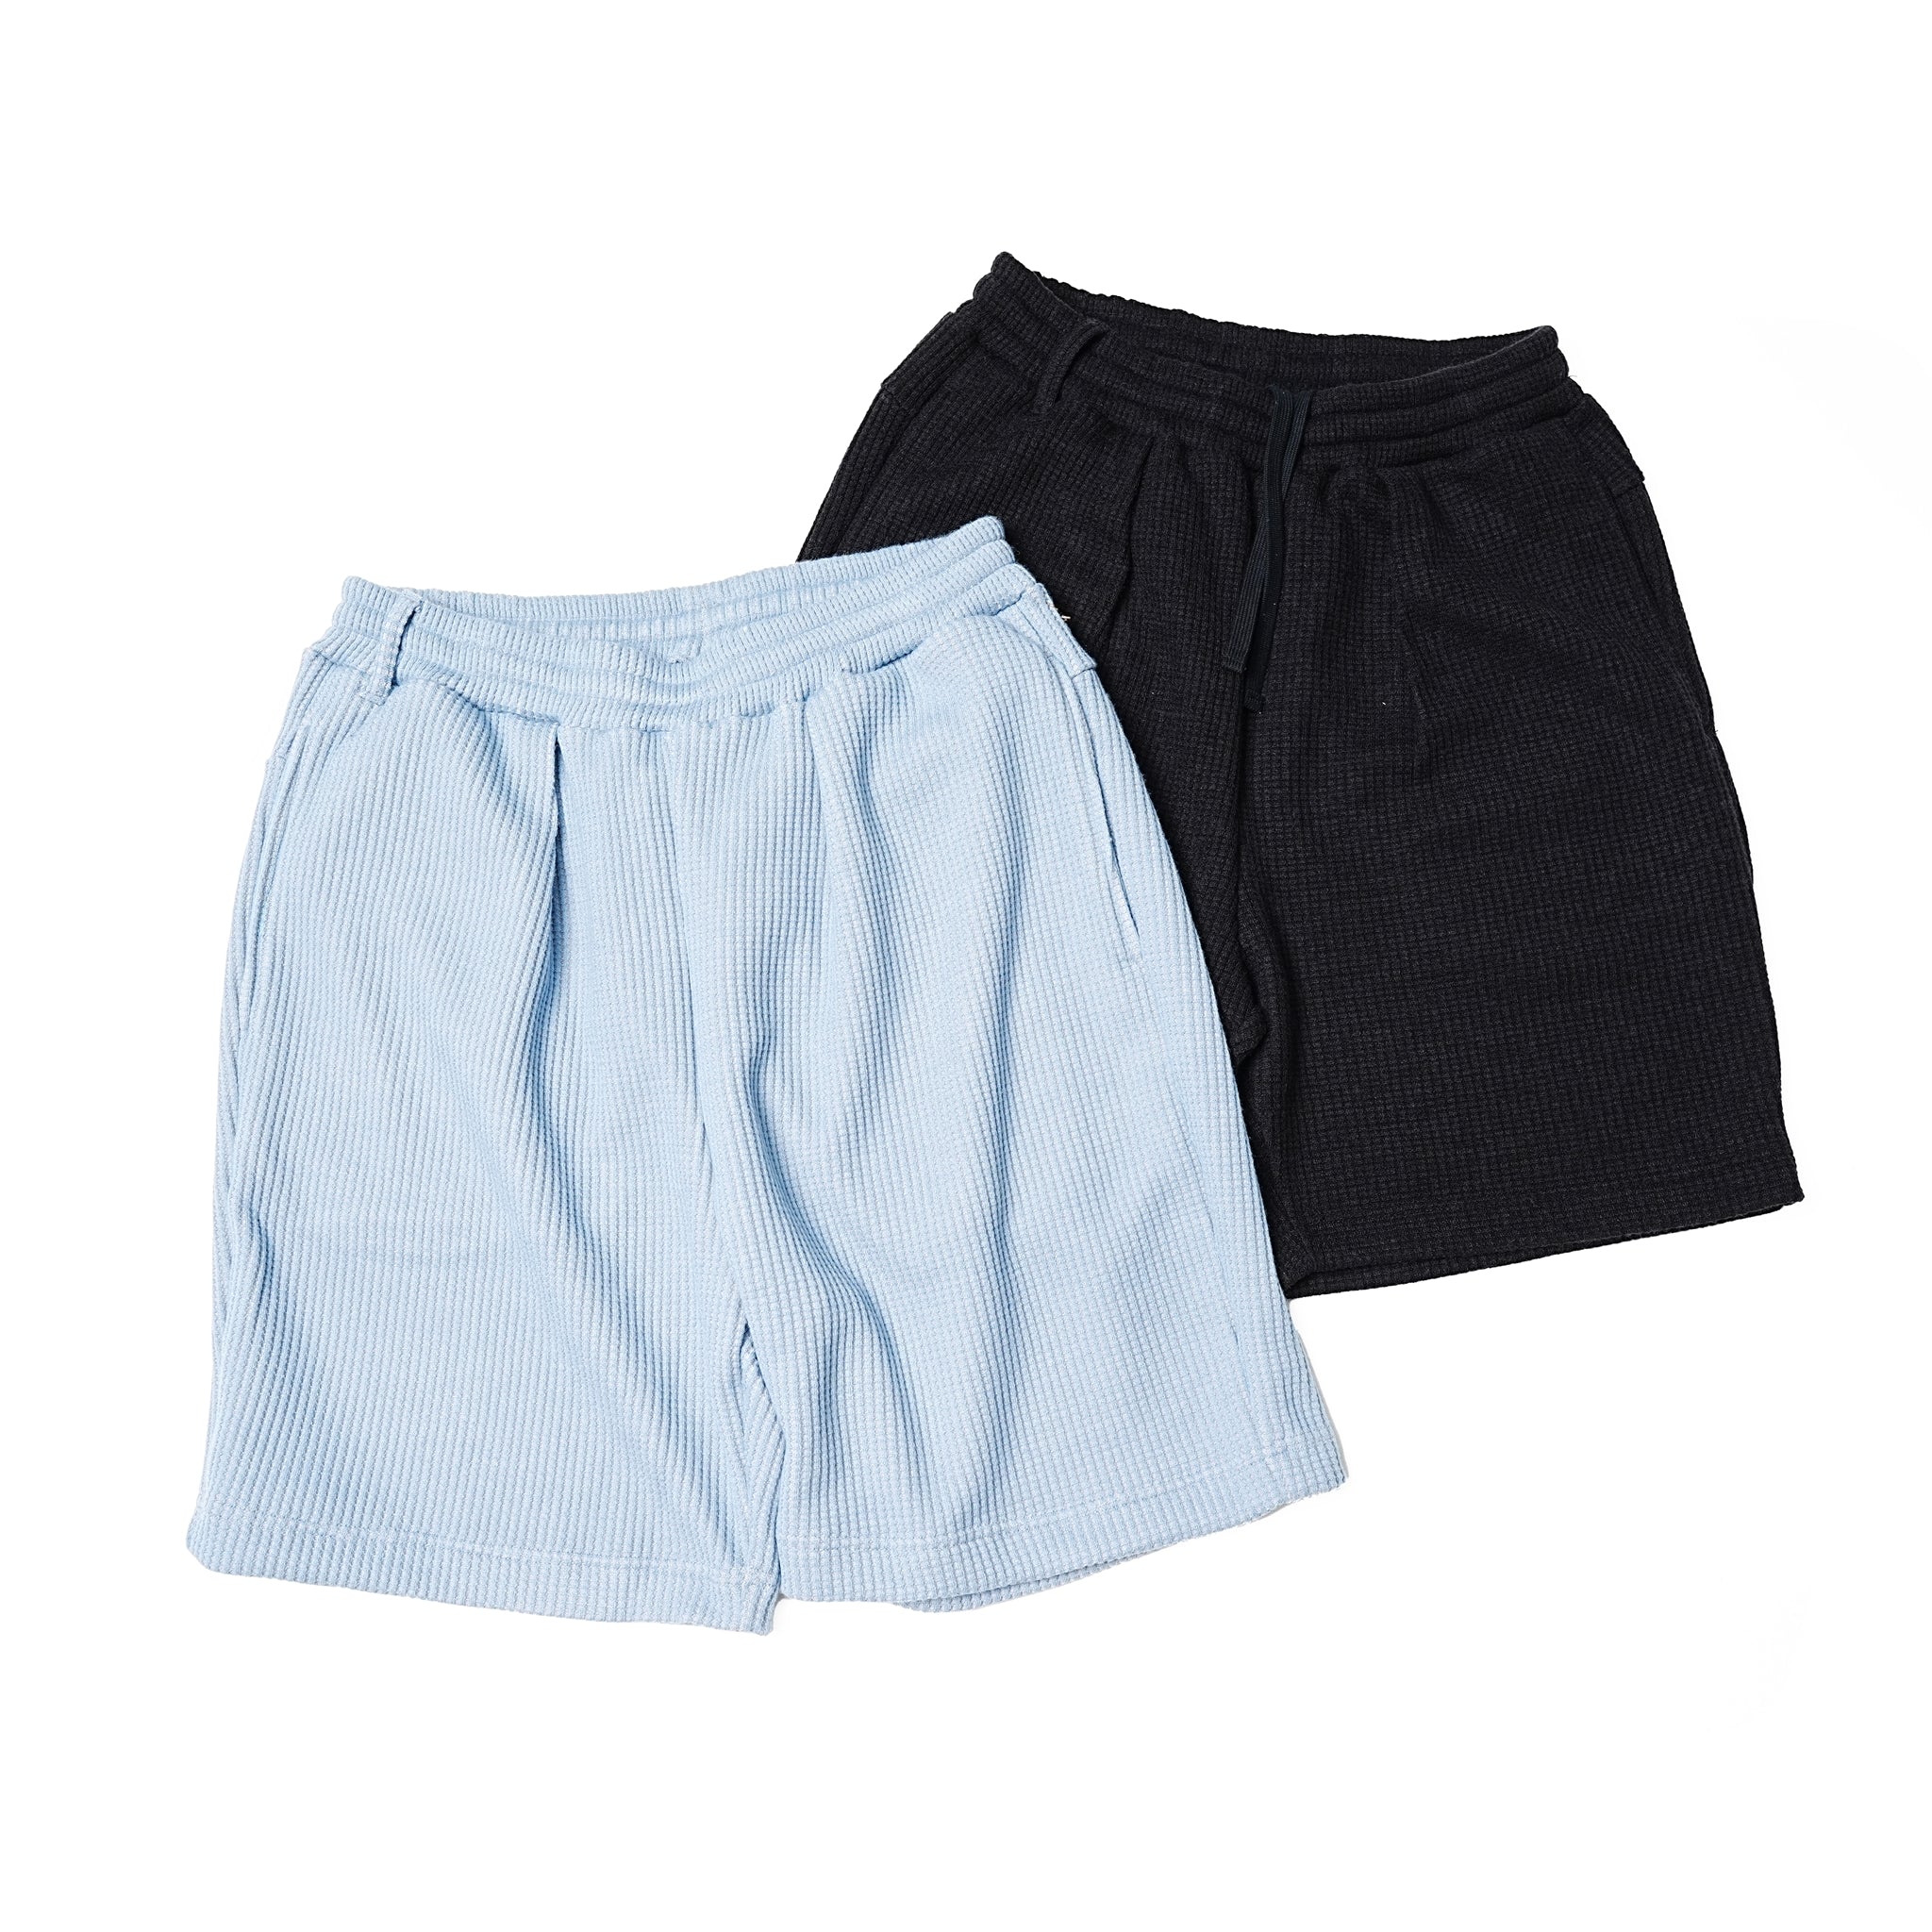 No:VOO-1185 | Name:WAFFLE SHORTS | Color:Steel/Black【VOO_ヴォー】【入荷予定アイテム・入荷連絡可能】